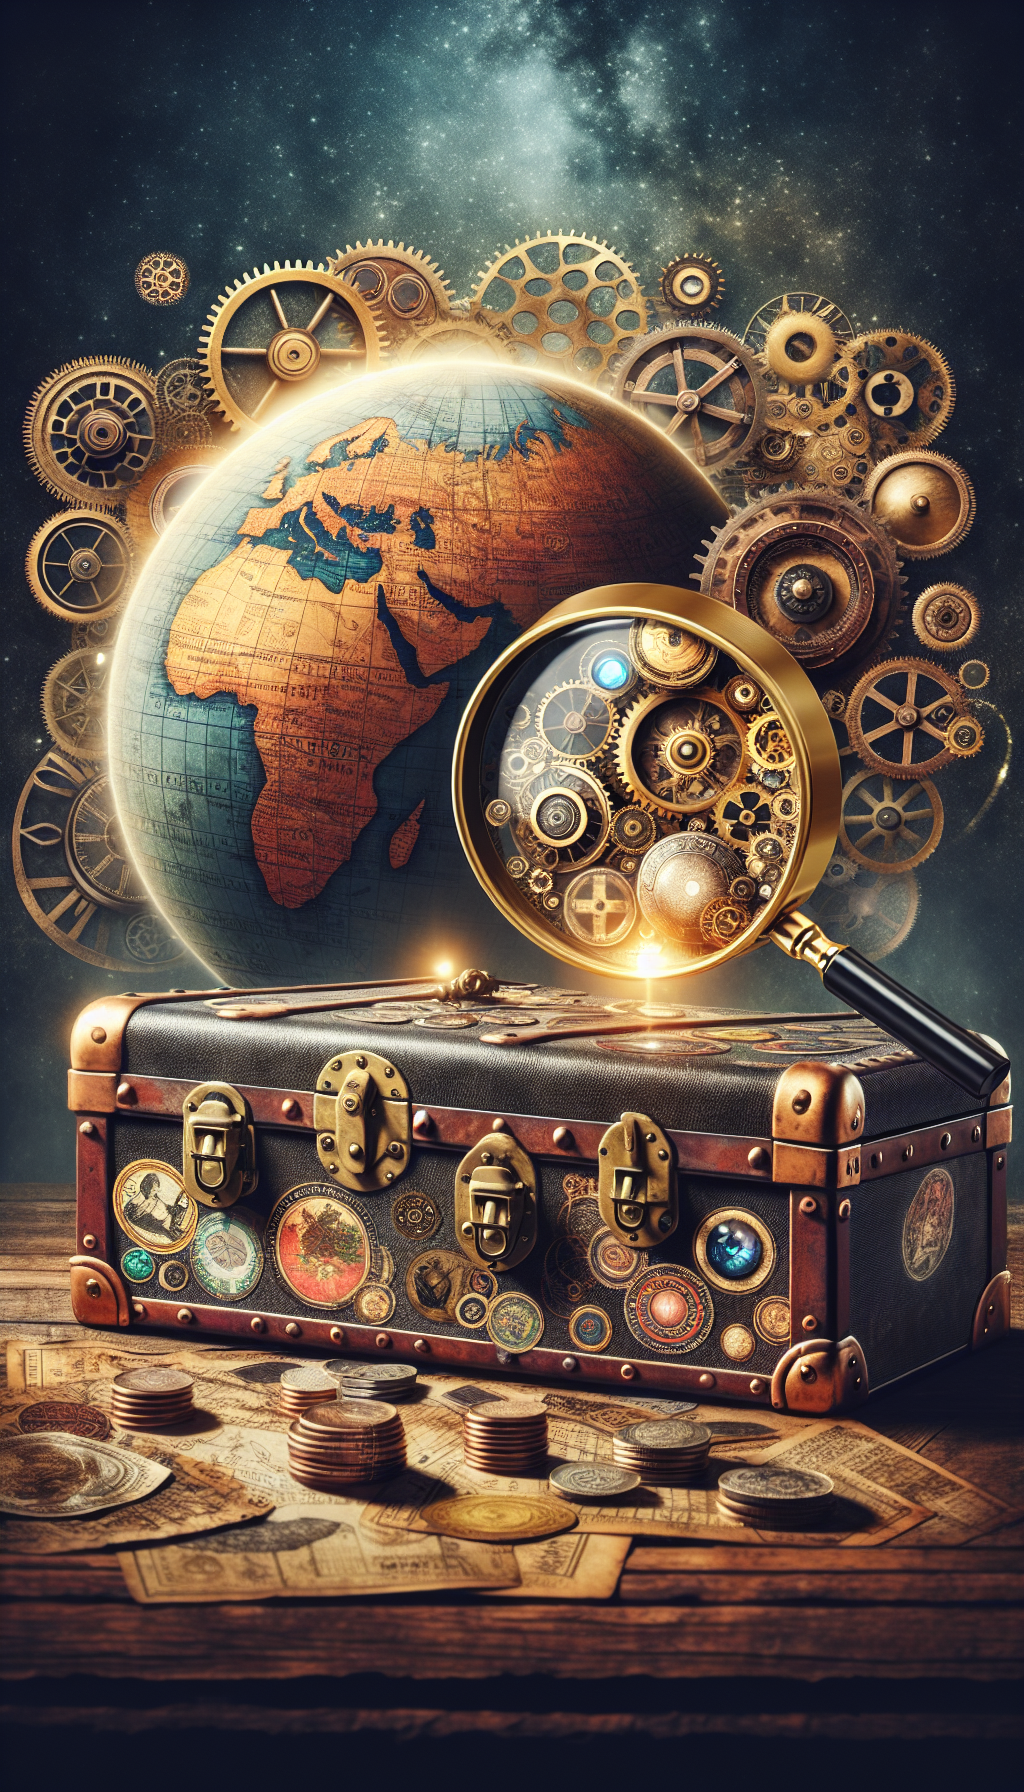 A whimsical steampunk-inspired globe, with intricately gears-intertwined continents, serves as the background for a sturdy, vintage trunk adorned with stickers from different historical eras. A magnifying glass hovers over the trunk, highlighting the increased value symbolized by golden coins and sparkling jewels spilling from its slightly ajar lid, signifying the timeless treasures of antique trunks.